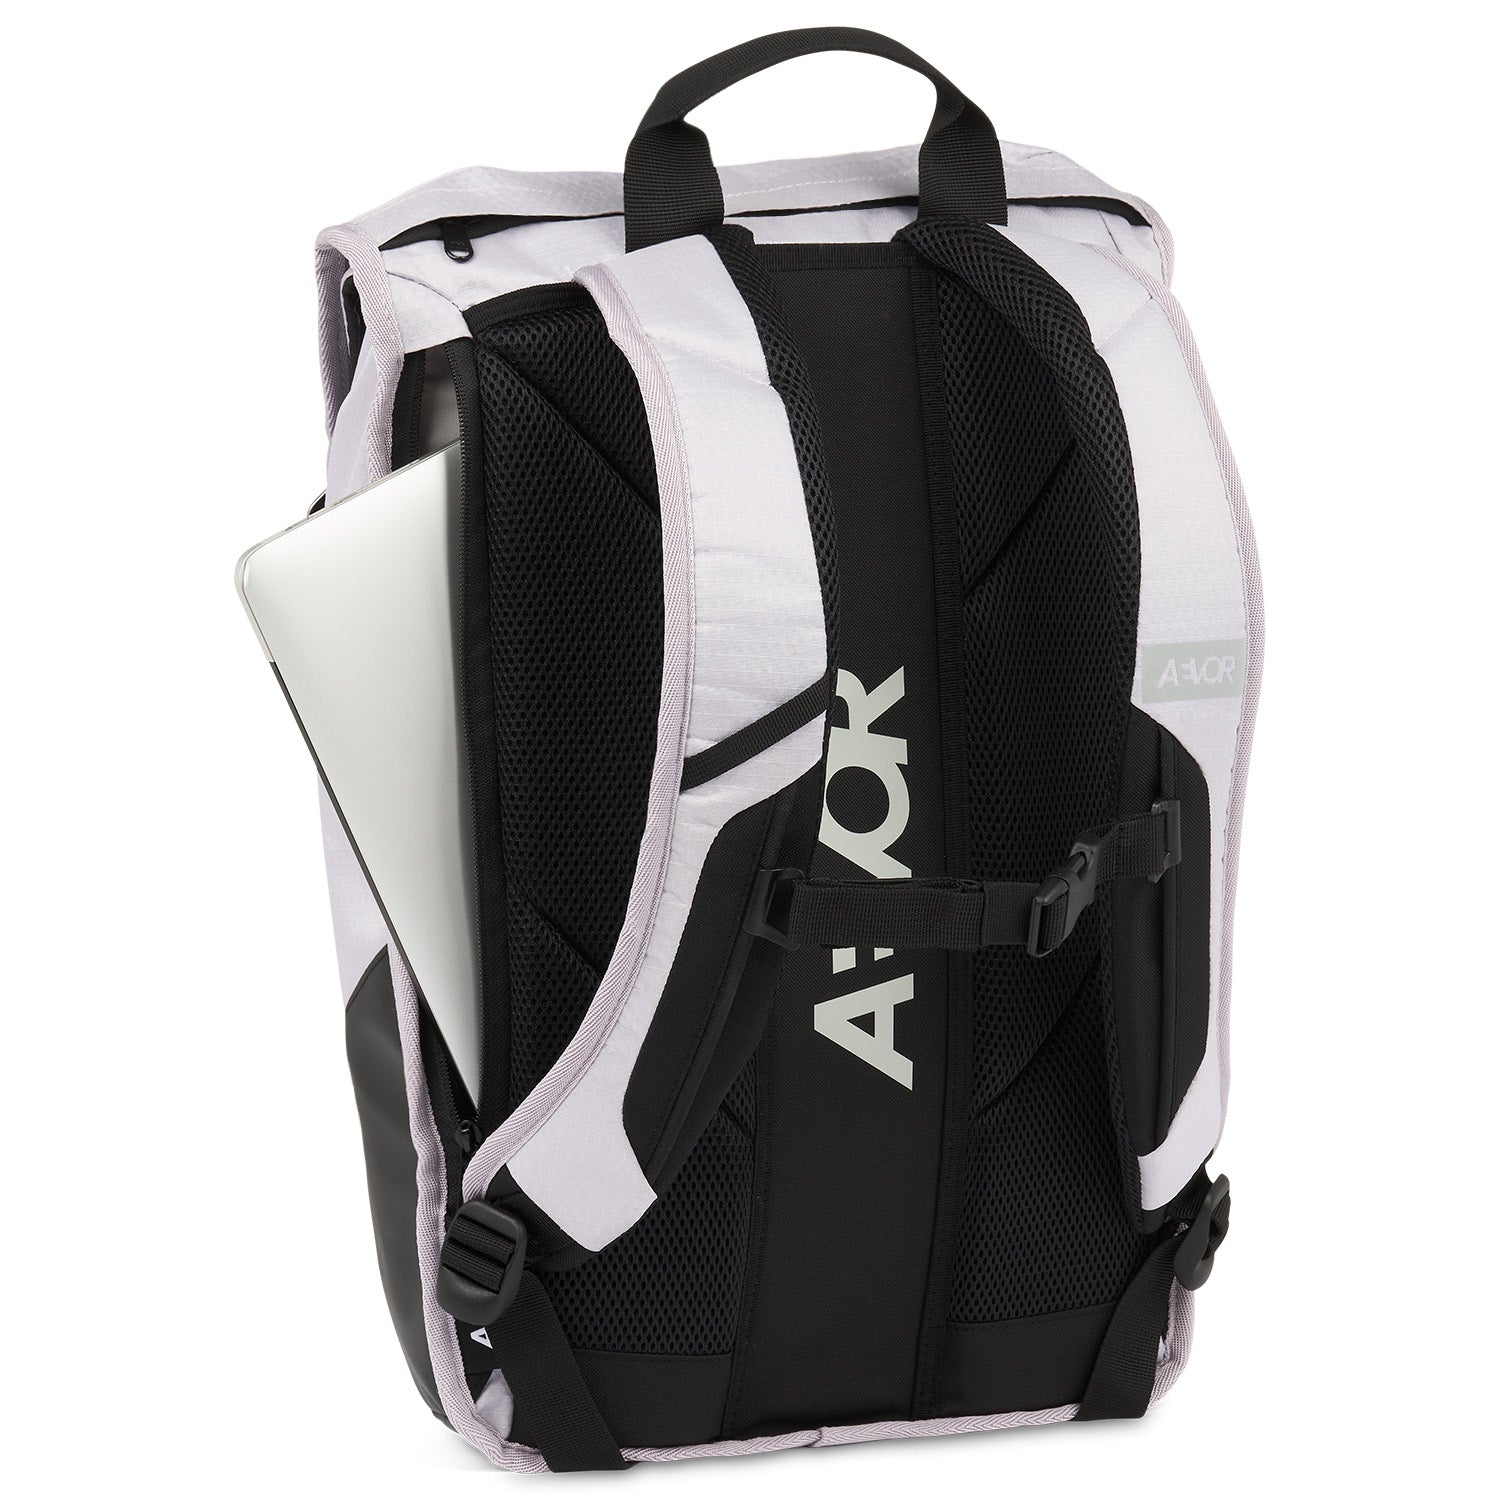 Aevor Daypack Proof - Waterproof Bag Made from Recycled PET-bottles Haze Bags